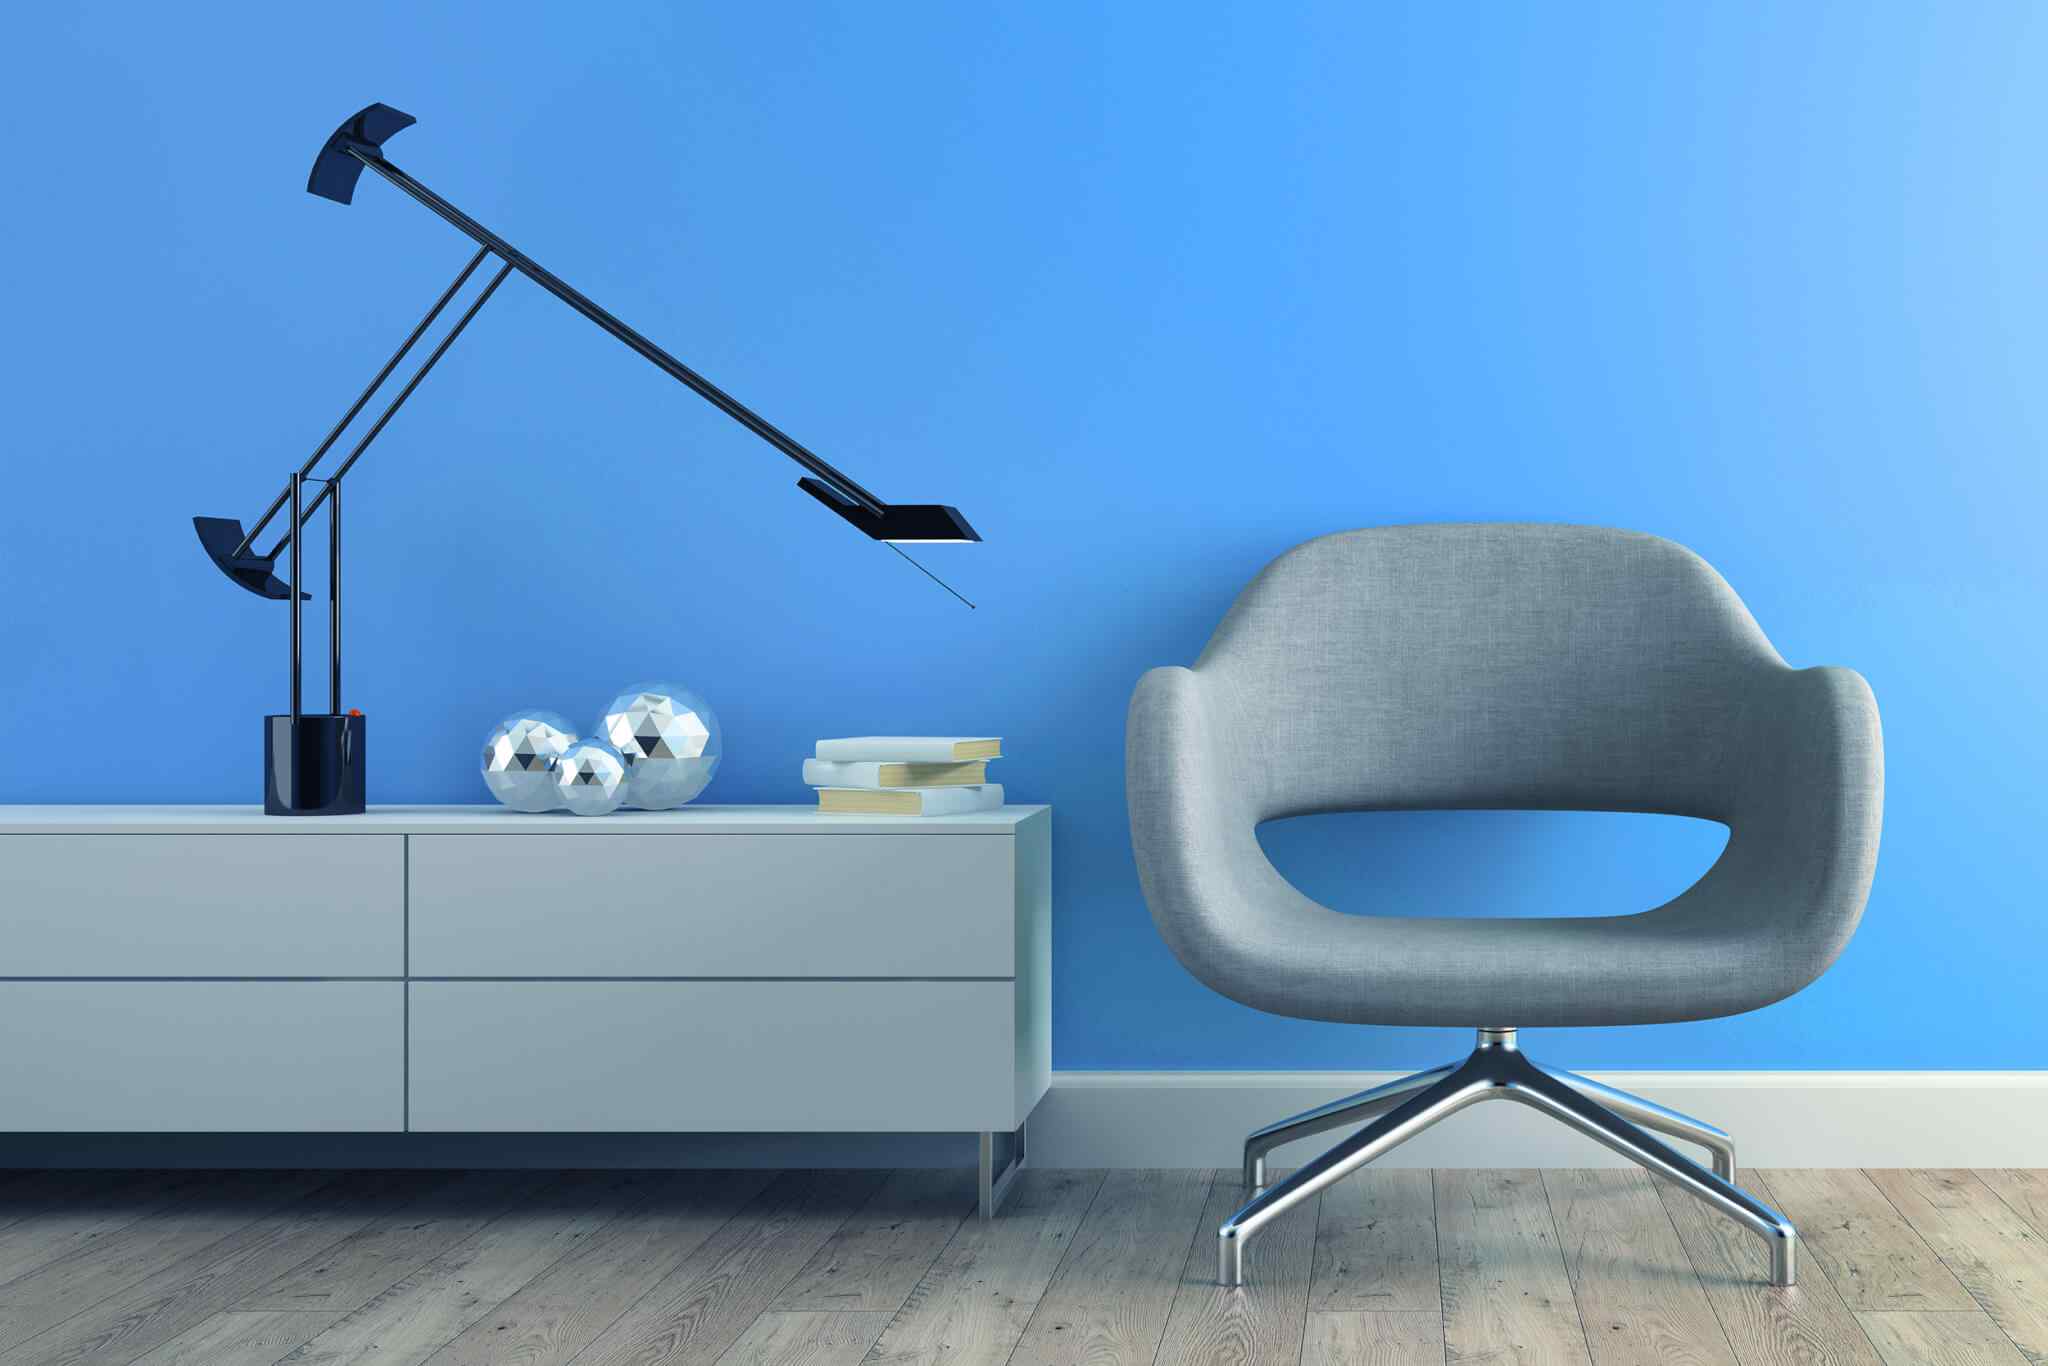 https://northcorp.ae/wp-content/uploads/2017/05/image-chair-blue-wall.jpg